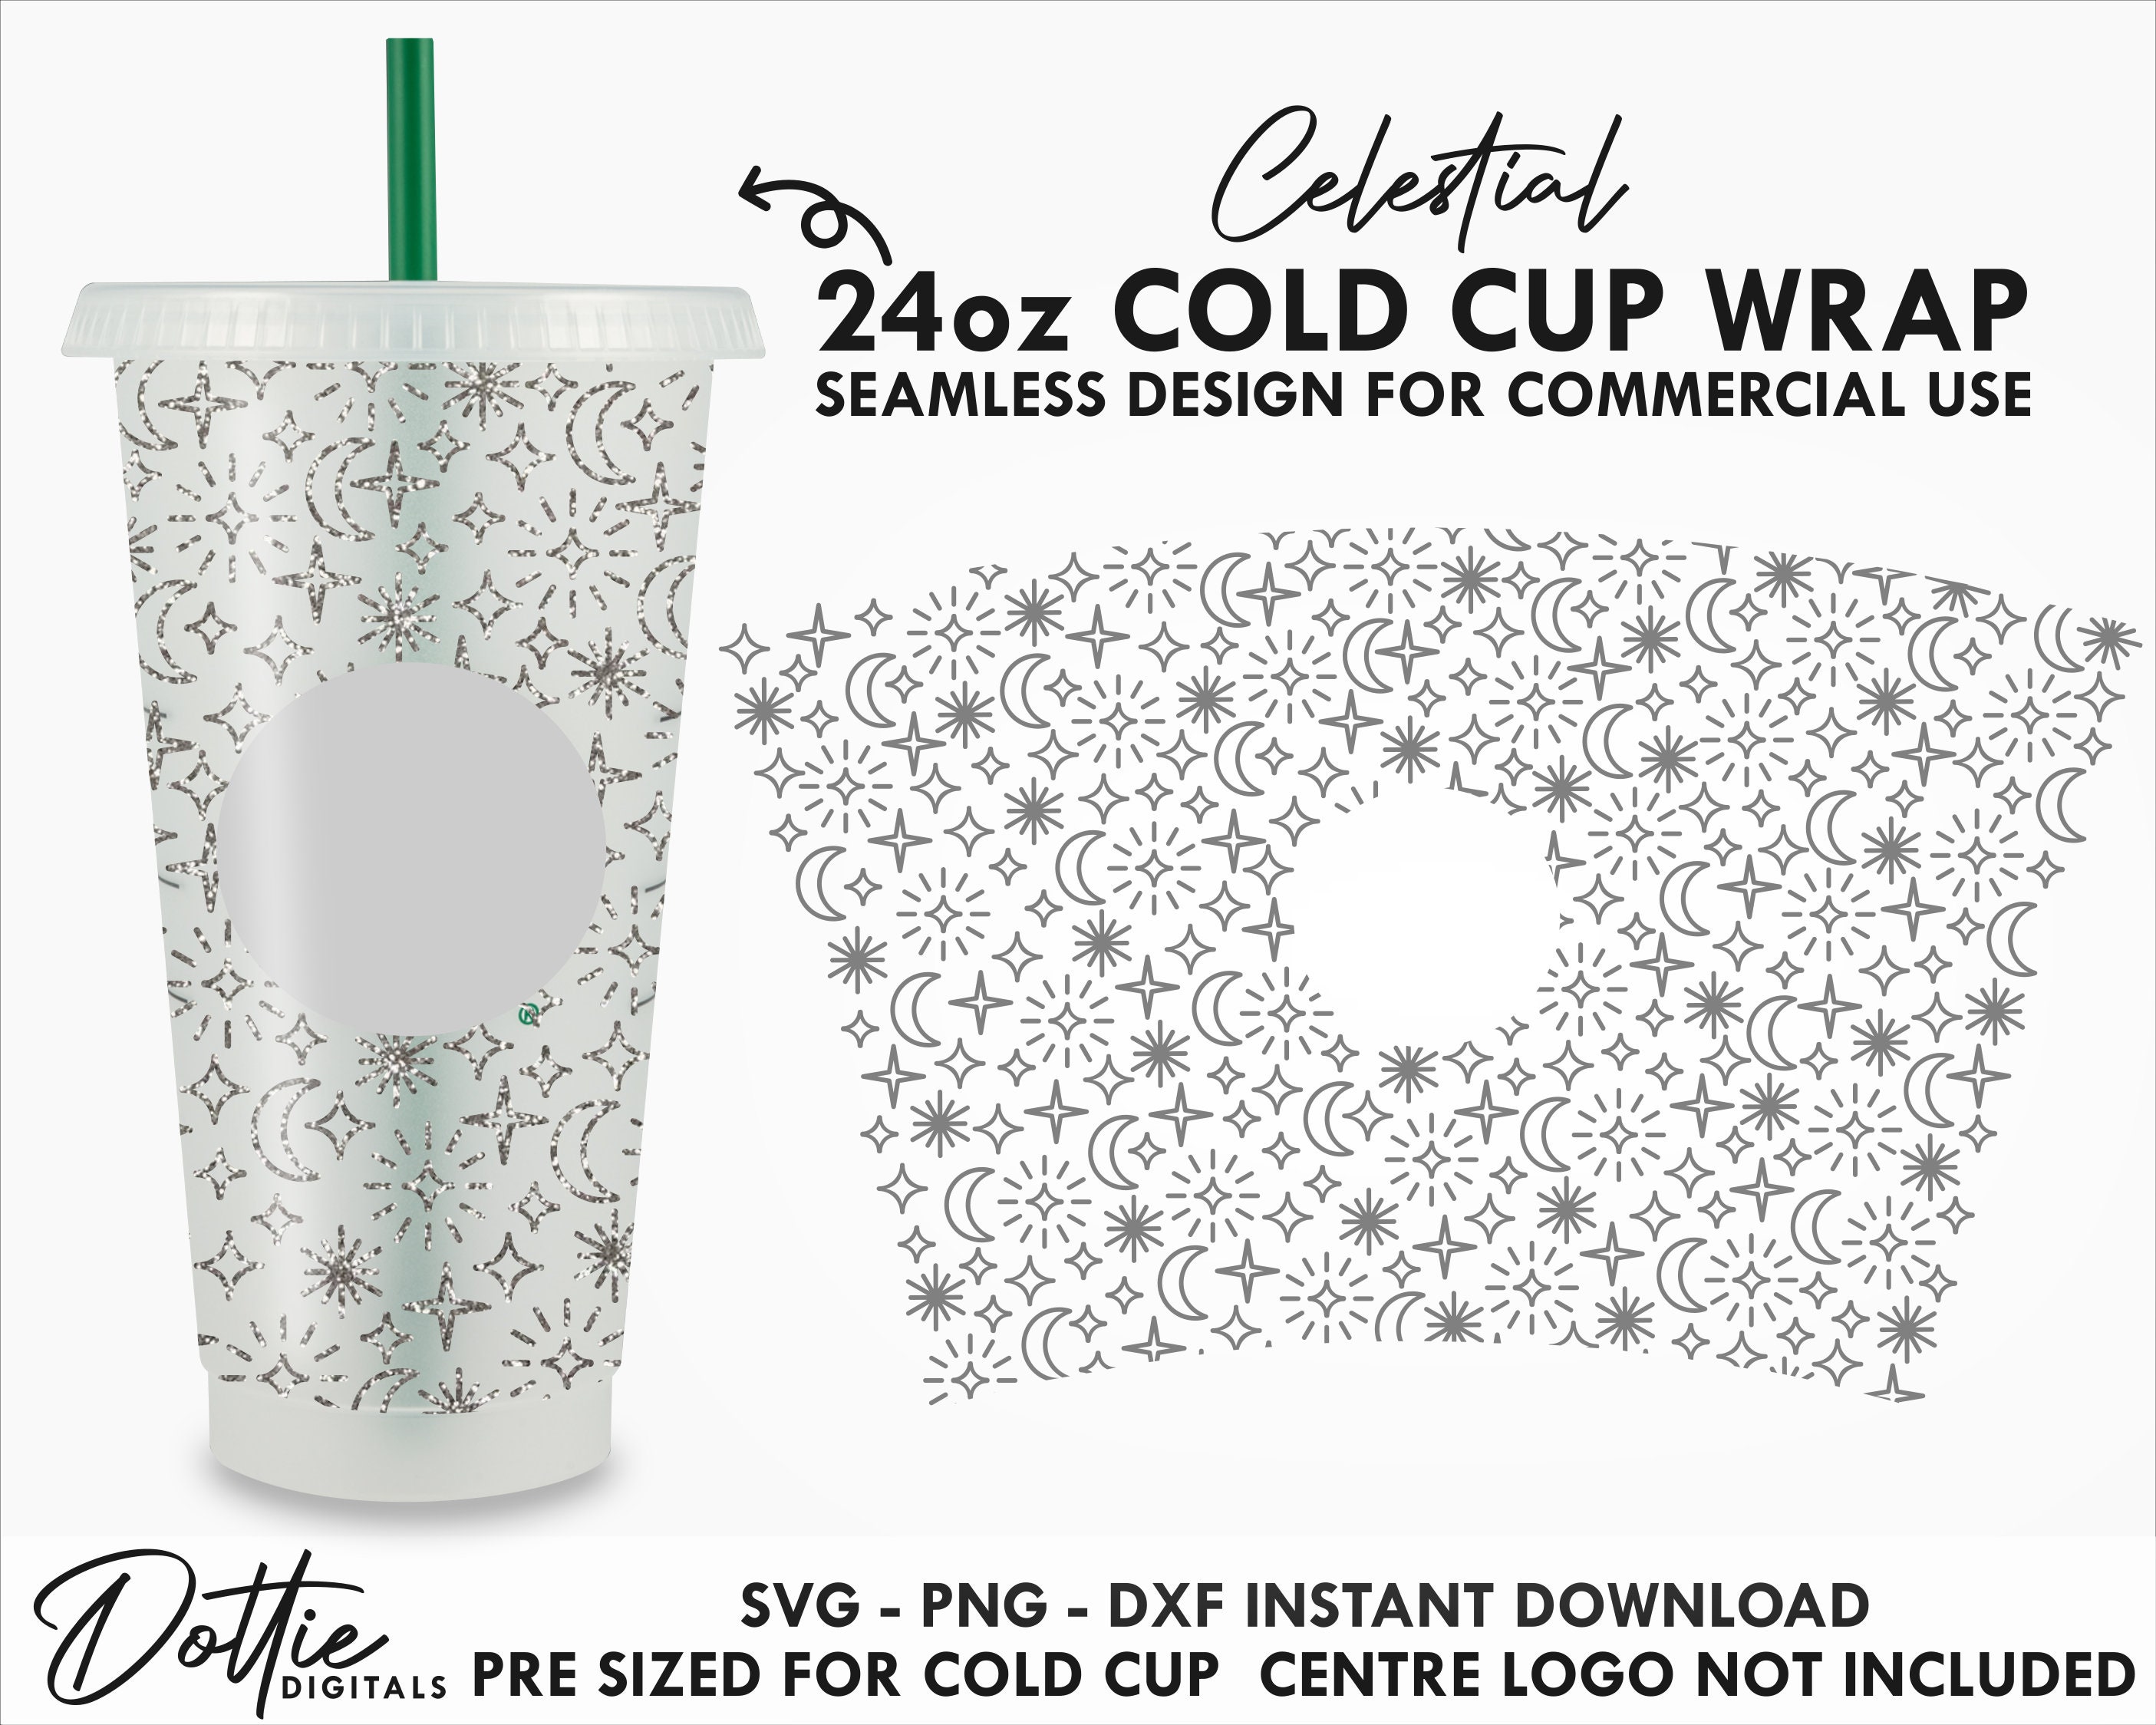 Dottie Digitals - Cowgirl Starbucks Cold Cup SVG PNG Dxf - Cowboy Rodeo  Wild West 24oz Venti Cup Coffee Tumbler Wrap